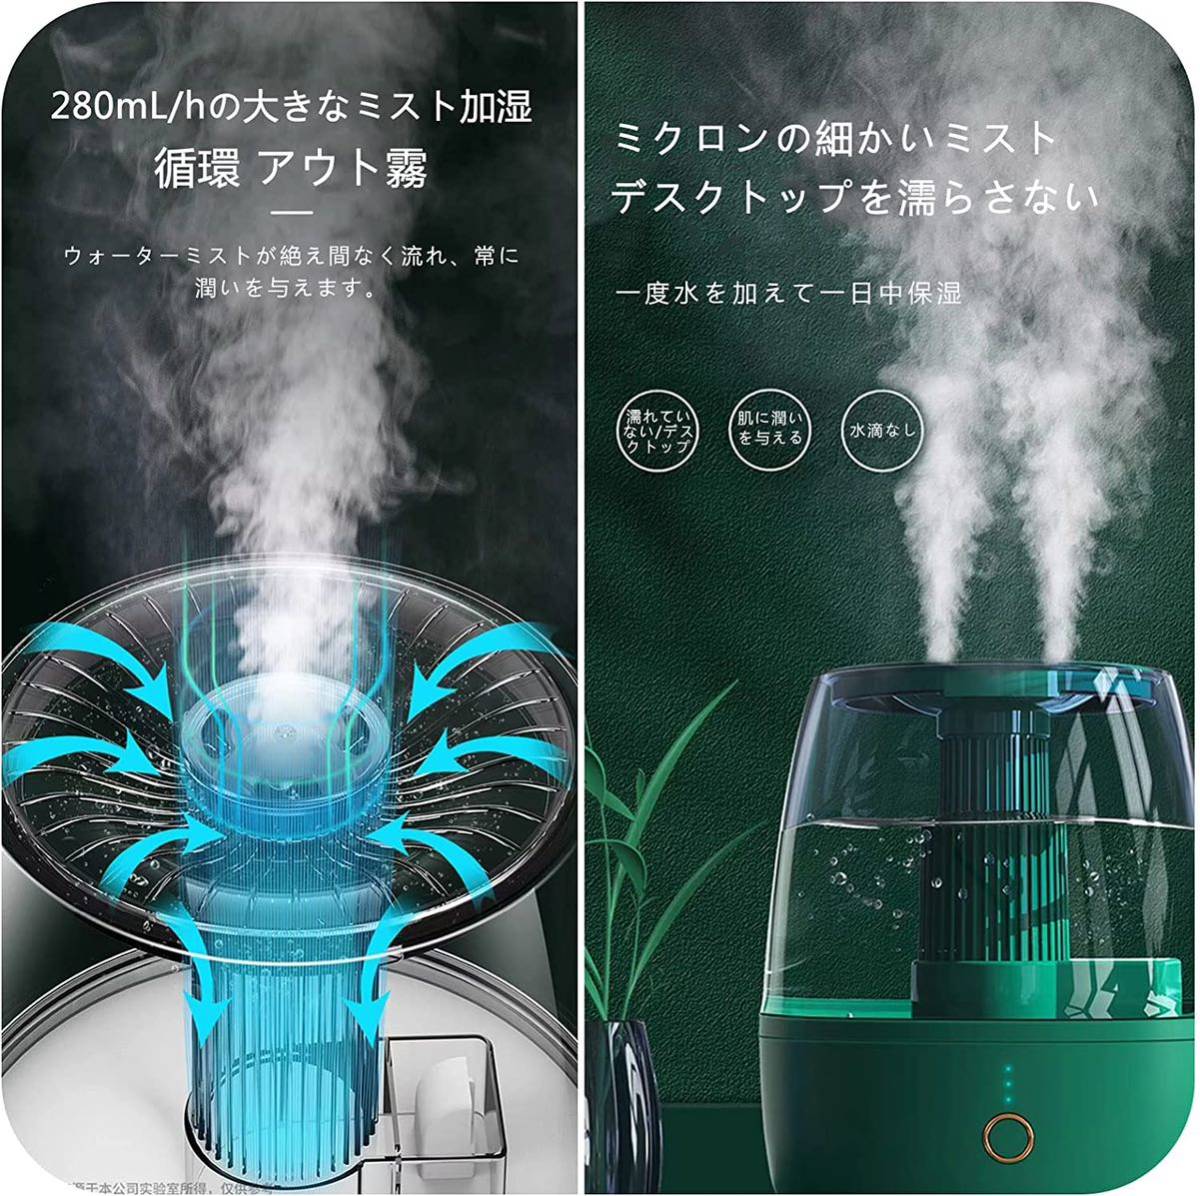  humidifier 6.8L high capacity desk humidifier energy conservation anti-bacterial aroma 360° rotation empty .. prevention 